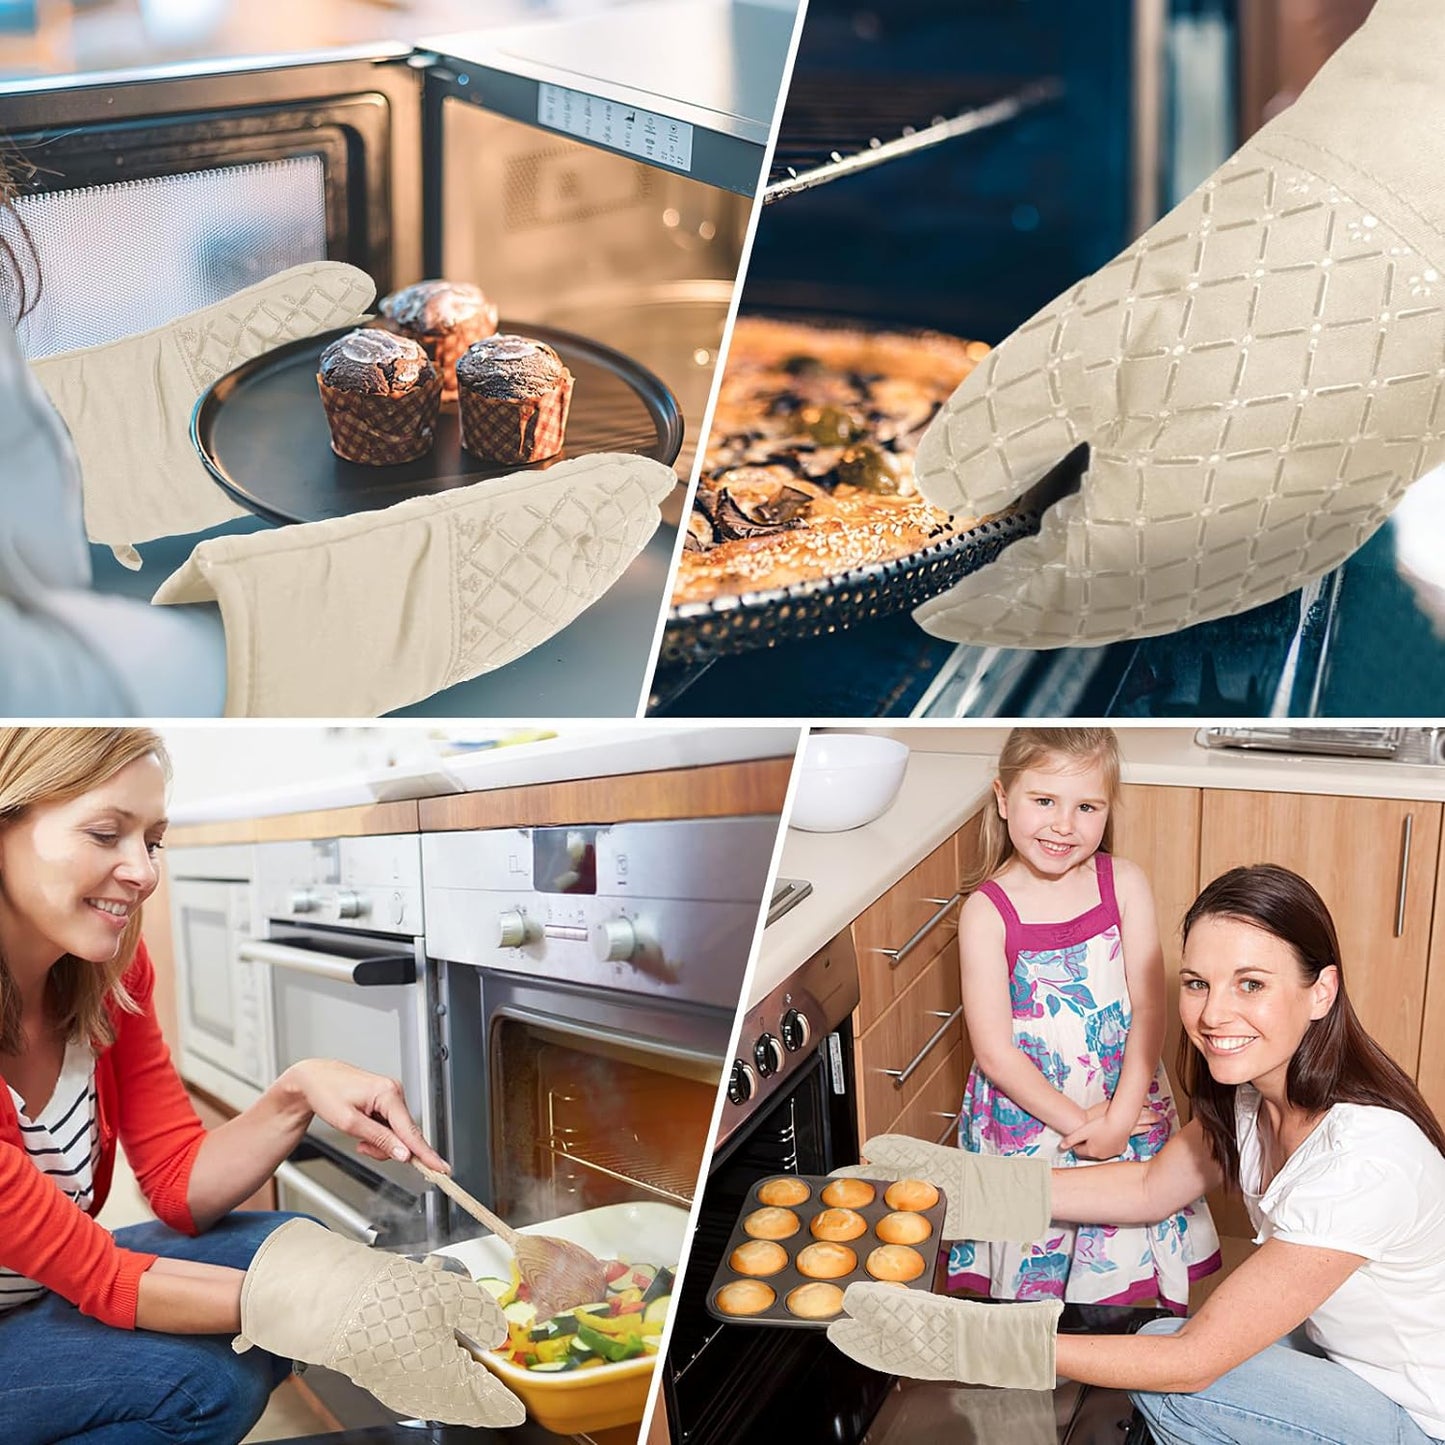 2 Pcs Oven Mitts Heat Resistant for Kitchen, Kitchen Oven Gloves, Long Oven Mitts and Pot Holder with Non-Slip Silicone Stripe and Soft Cotton Lining, Silicone Oven Mitts for Cooking Baking BBQ Khaki